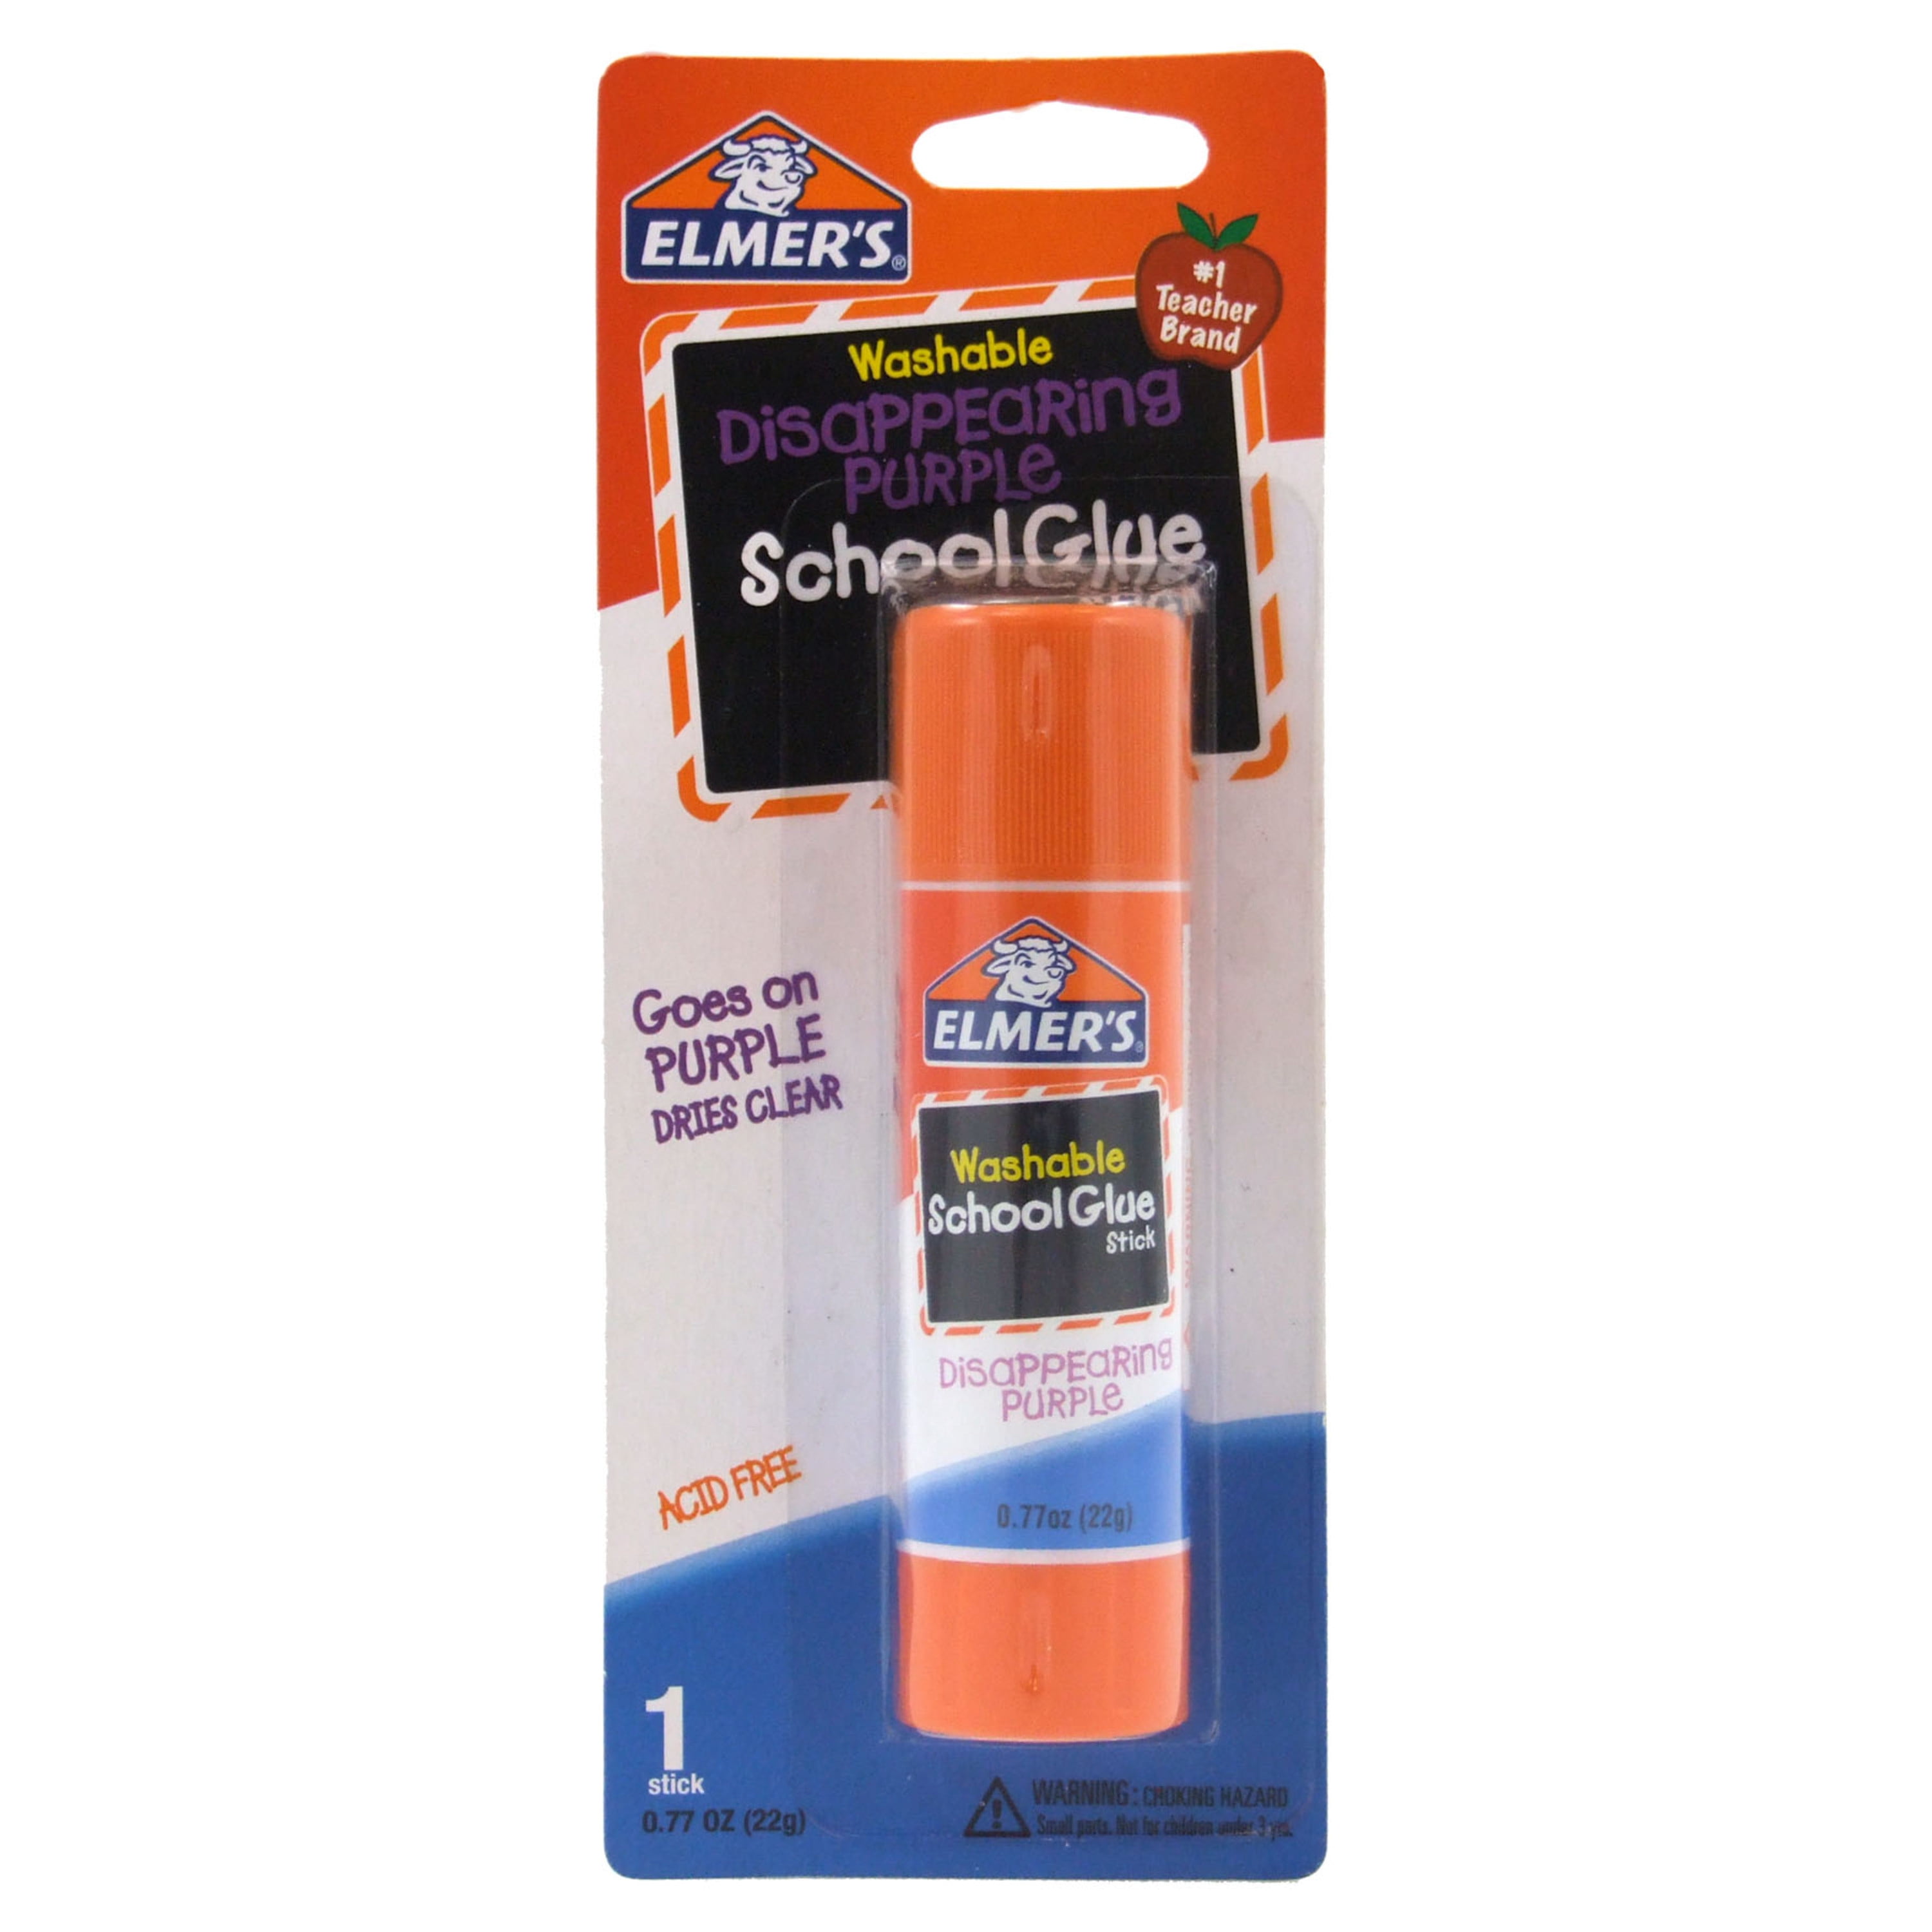 Elmer's Scented Glue Sticks 12-Count Variety Pack Just $4.47 at Walmart